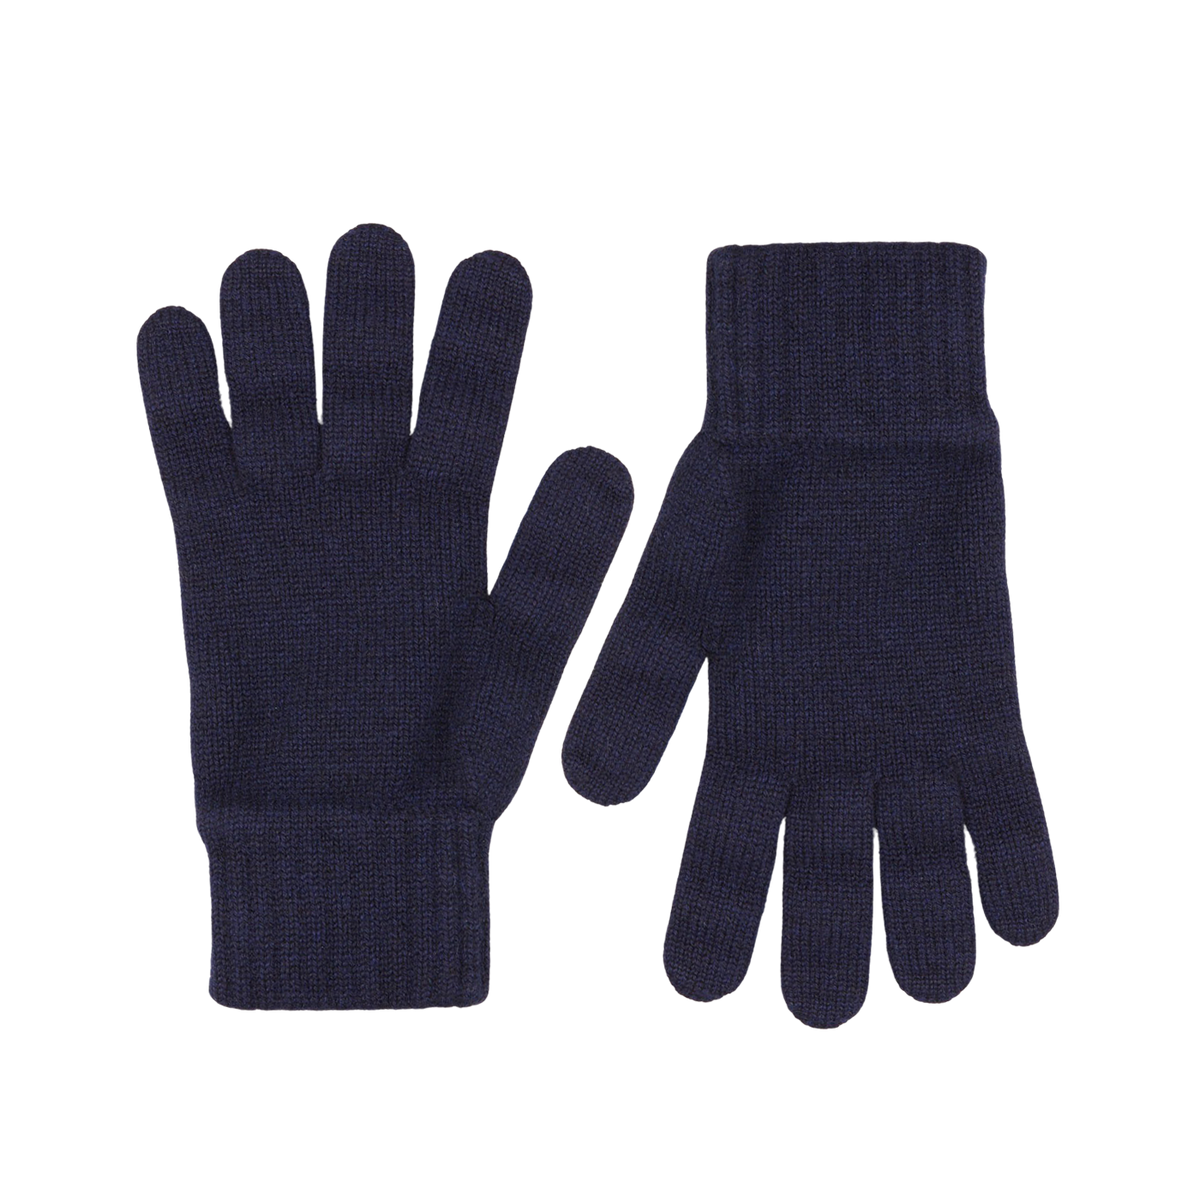 A pair of William Lockie navy blue pure cashmere gloves on a white surface.